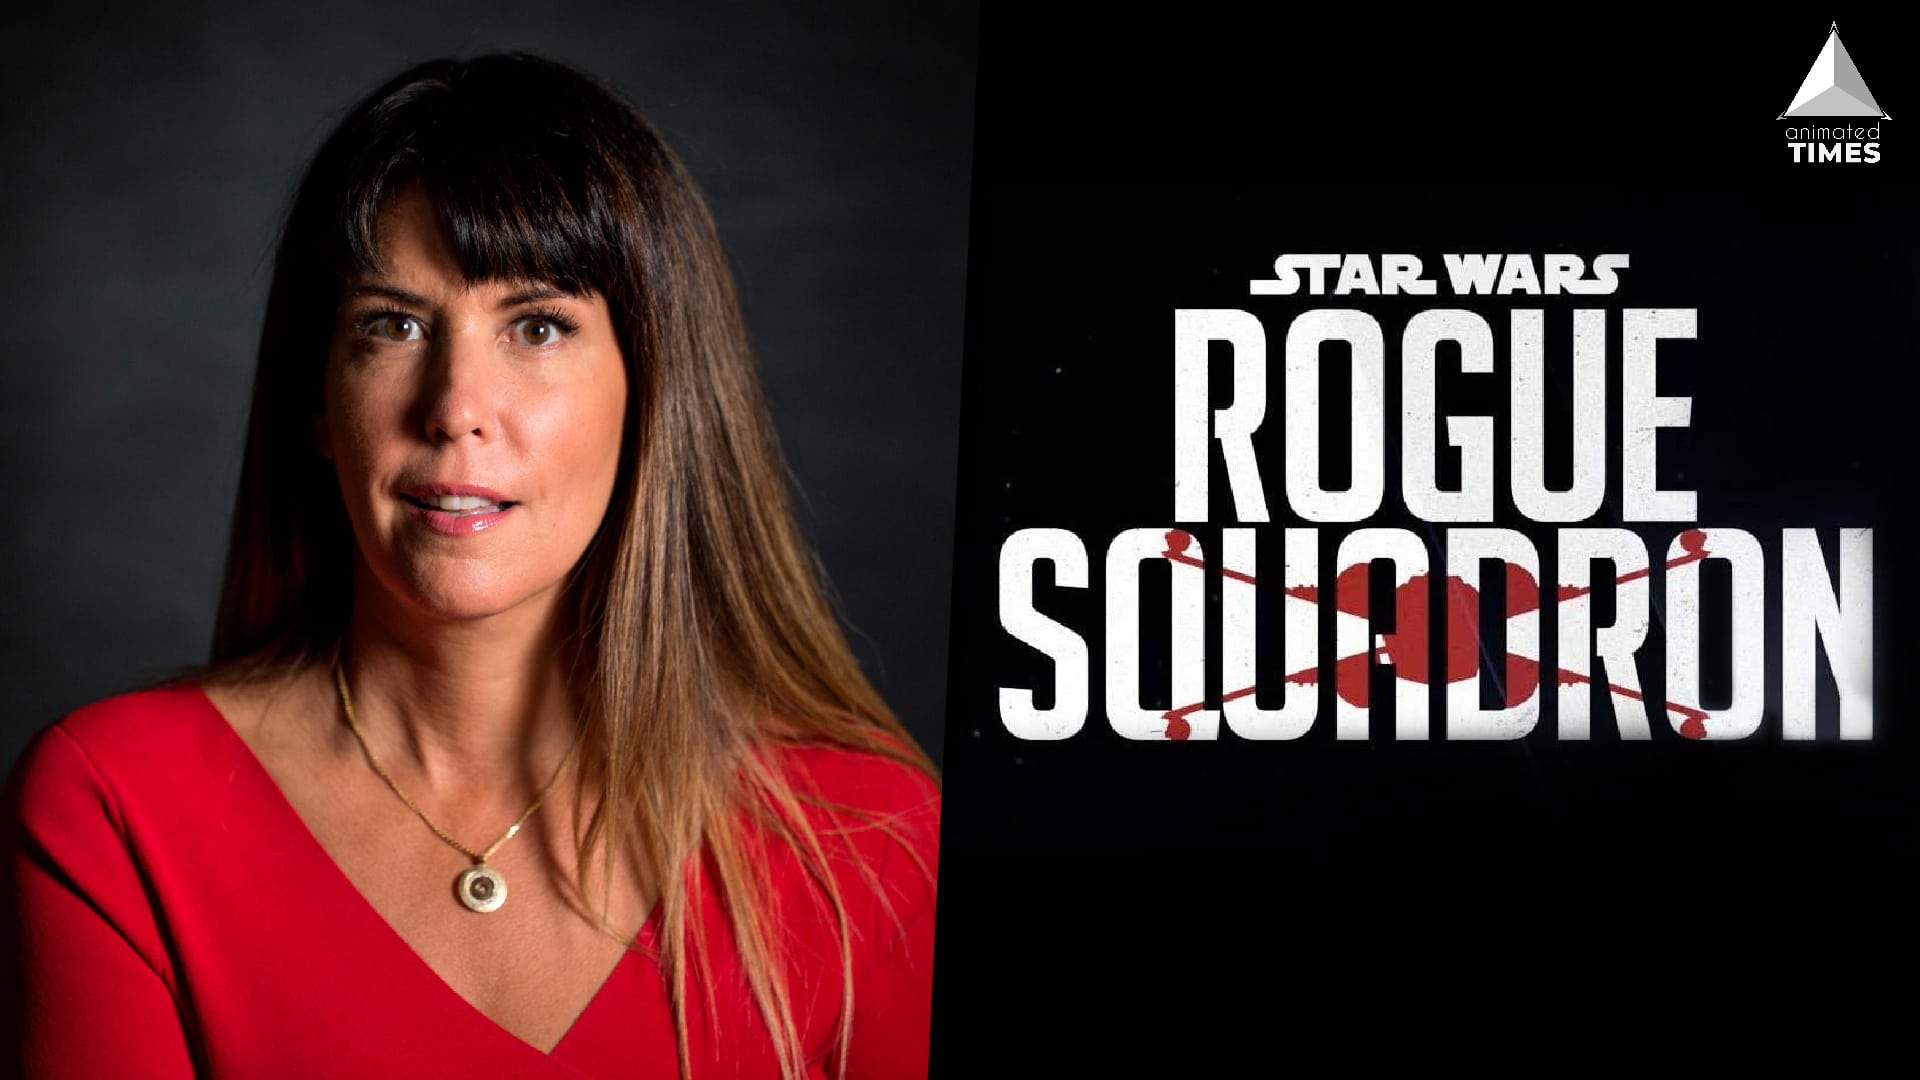 Rogue Squadron: Patty Jenkins To Be The First Female Star Wars Film Director